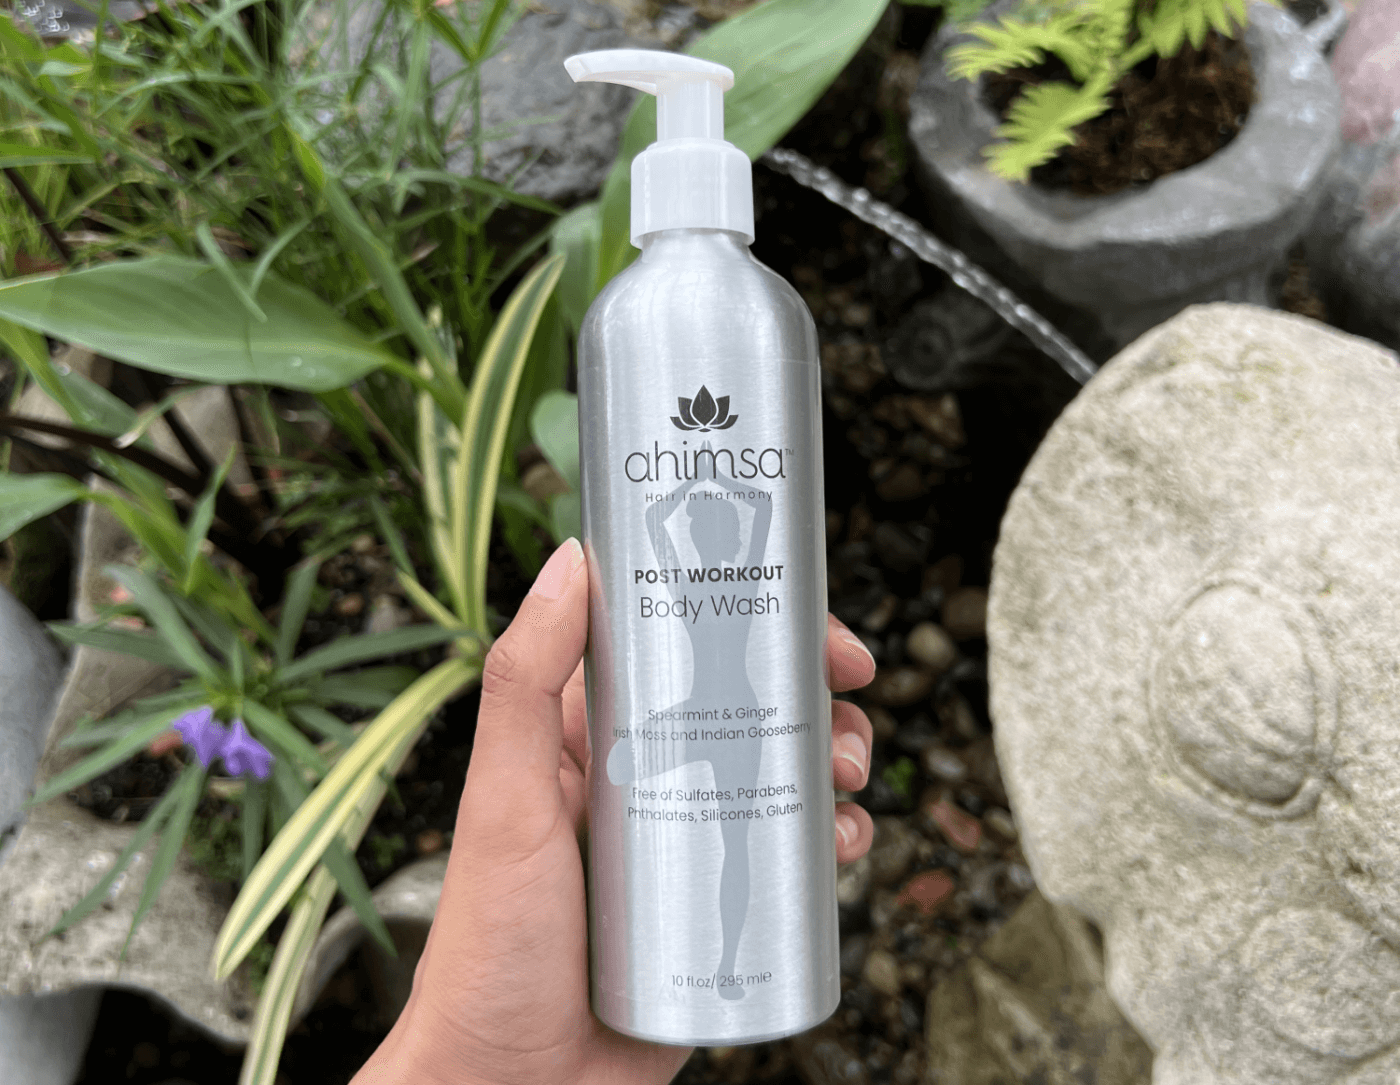 ahimsa body wash for post workout clean natural soft skin healthy vegan cruelty free